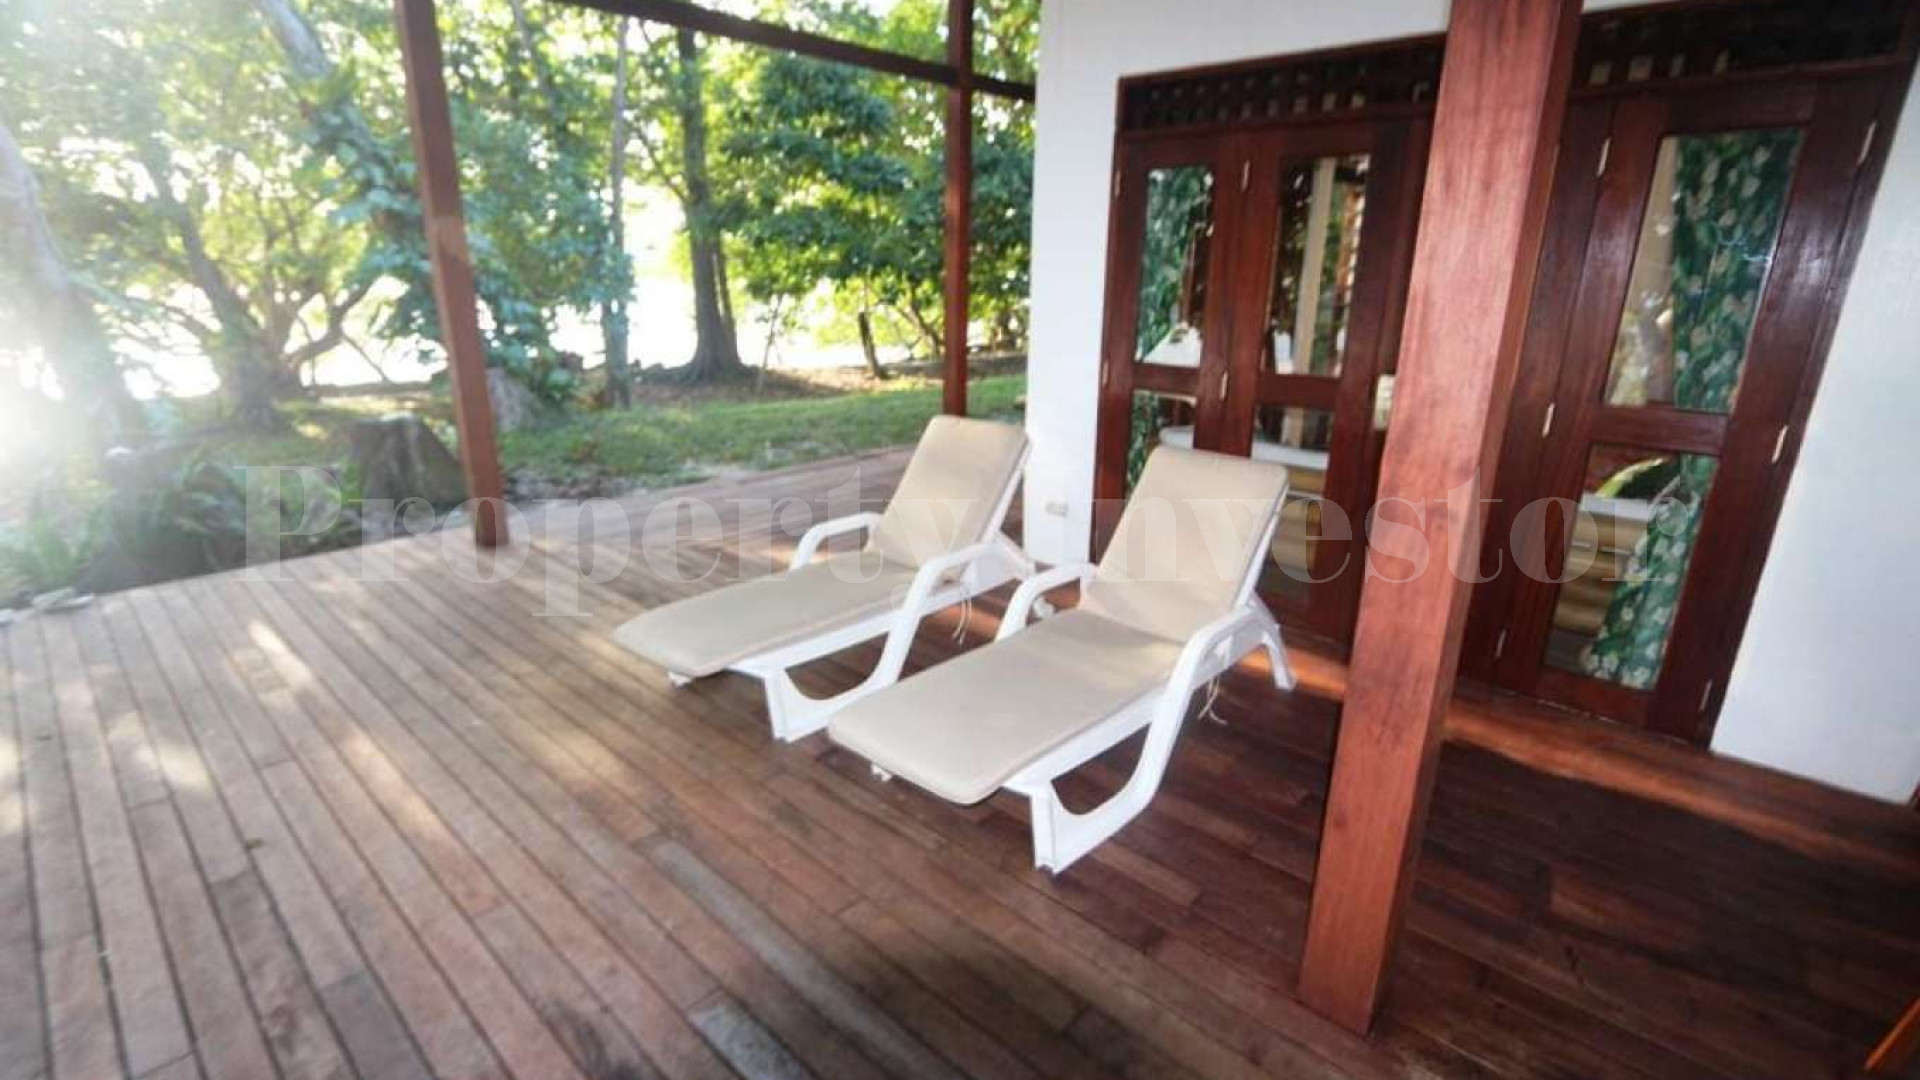 1.72 Hectare Private Island Hideaway Residence for Sale in Vanuatu